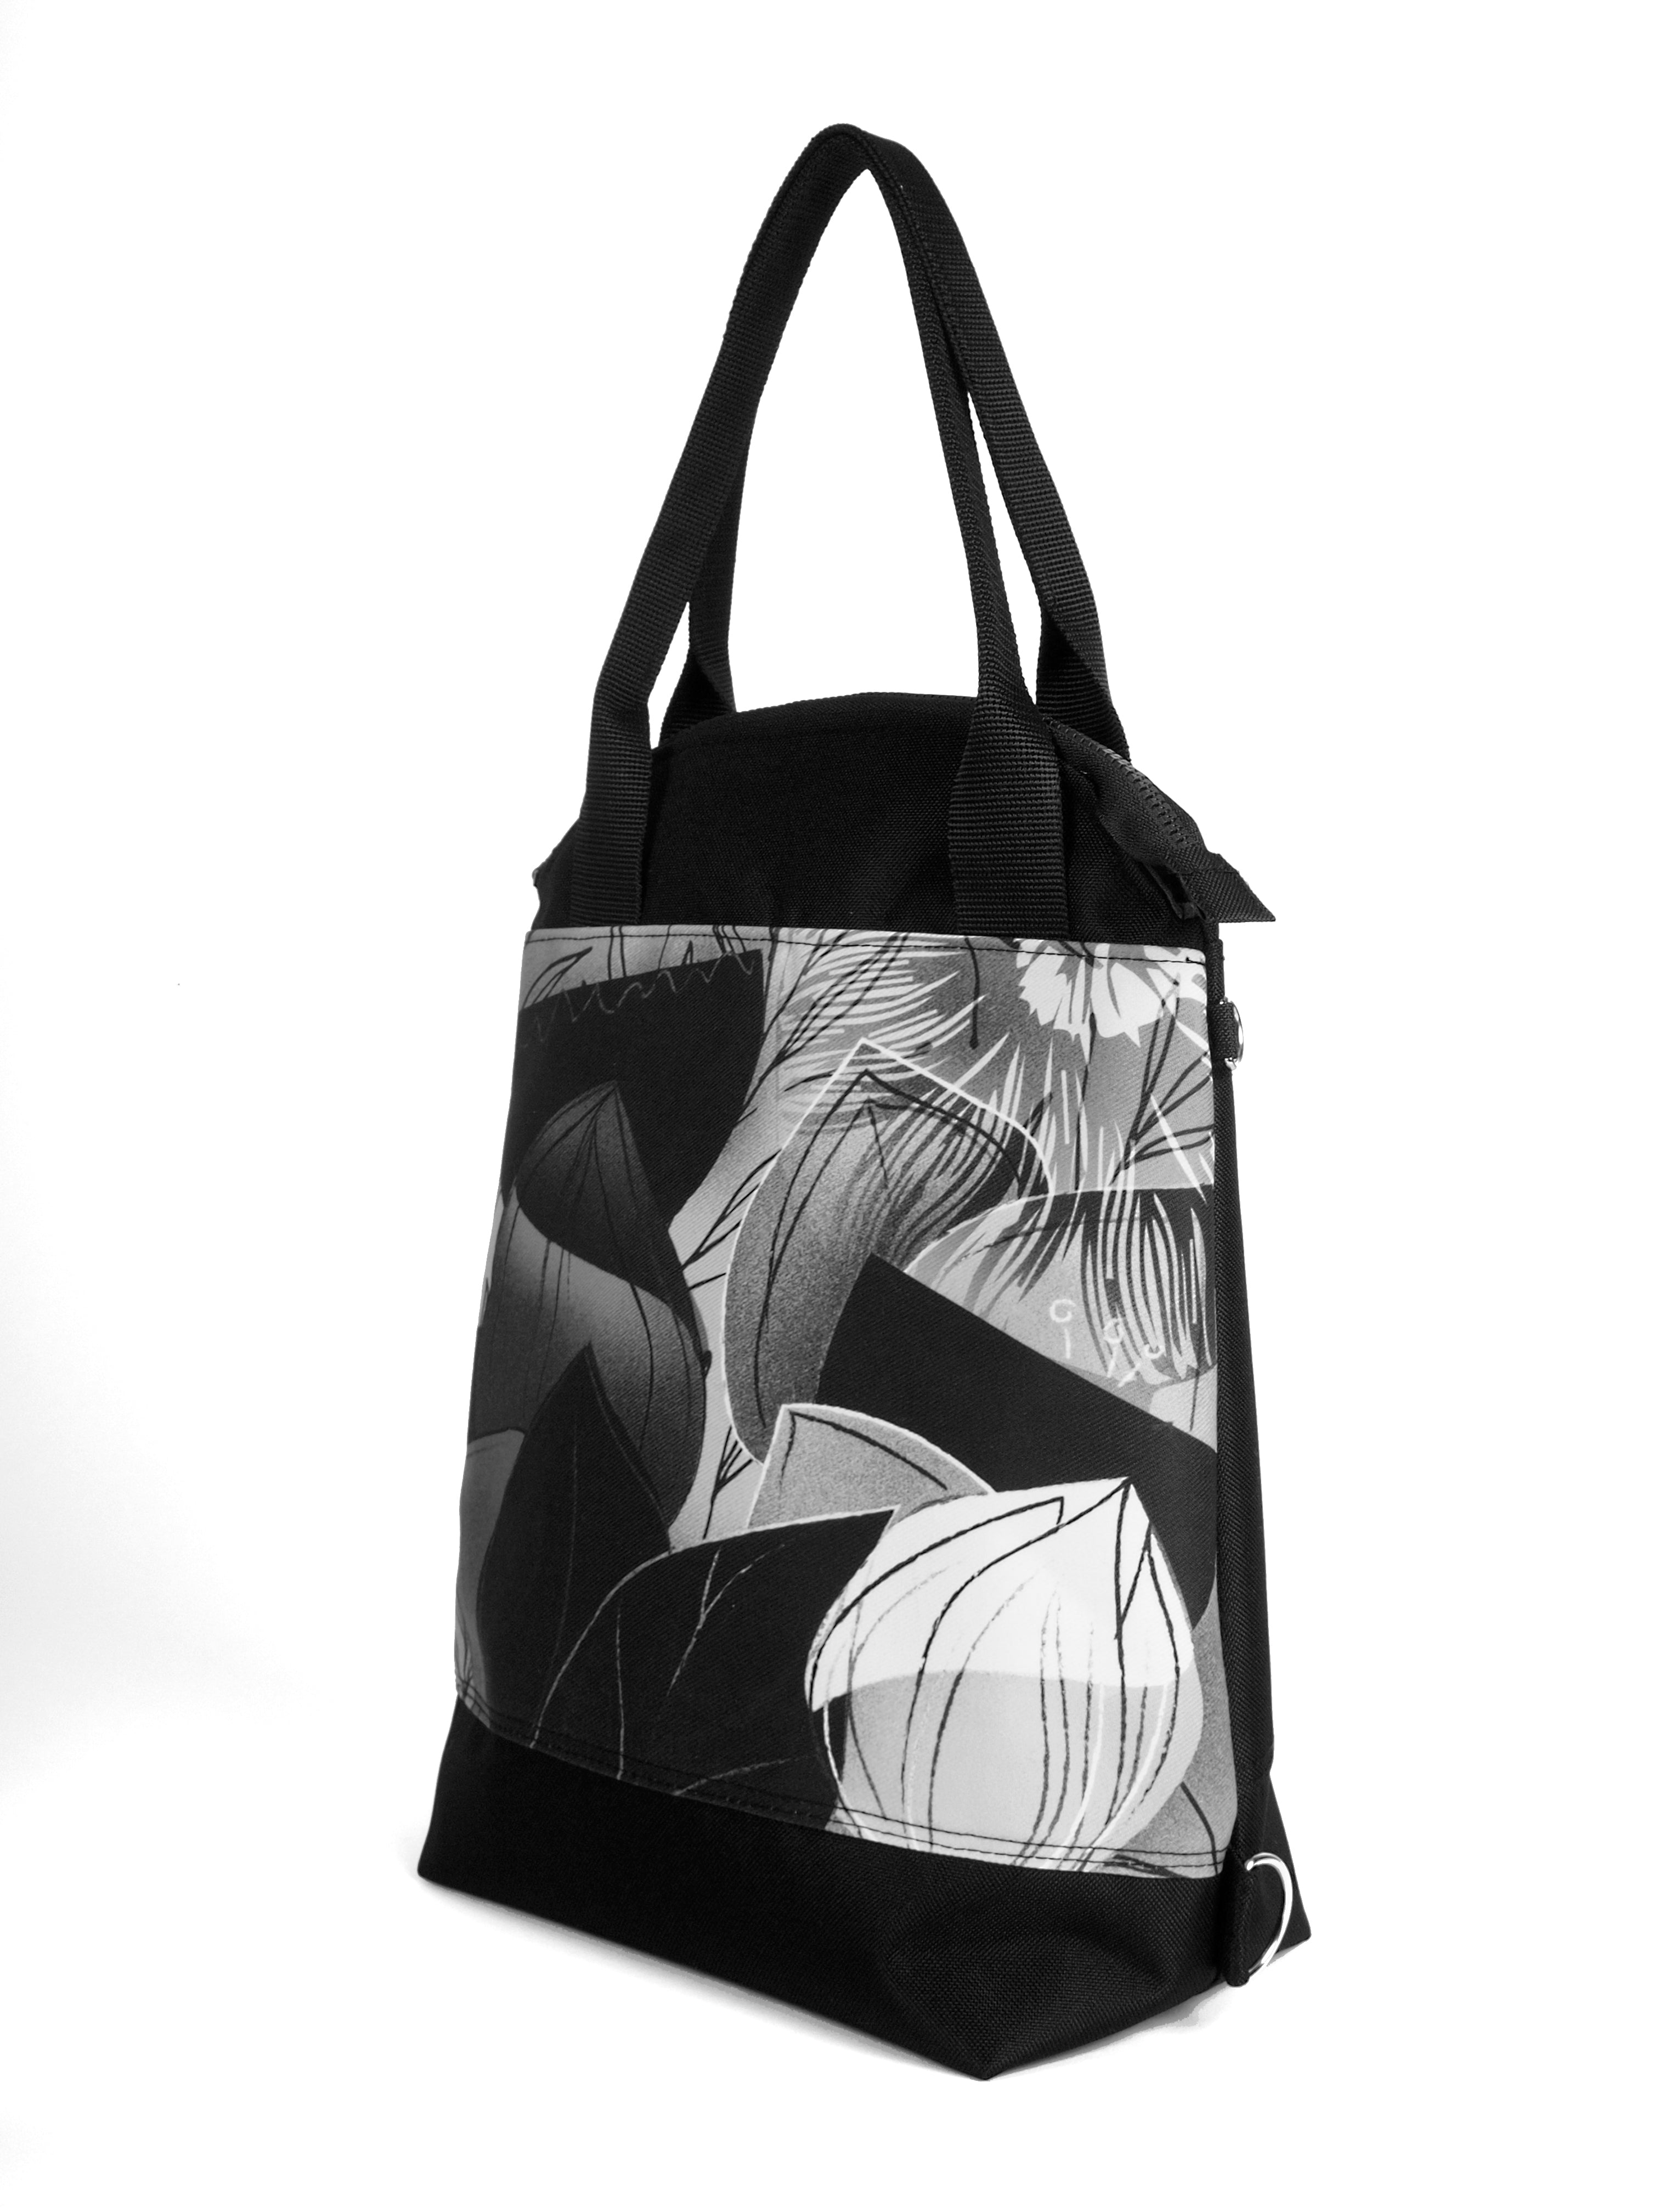 Bardo classic backpack textiles - Forest flowers b&w - Premium Textiles from BARDO ART WORKS - Just lvabstract, black, floral, handemade, leaves, tablet, urban style, woman, work bag89.00! Shop now at BARDO ART WORKS